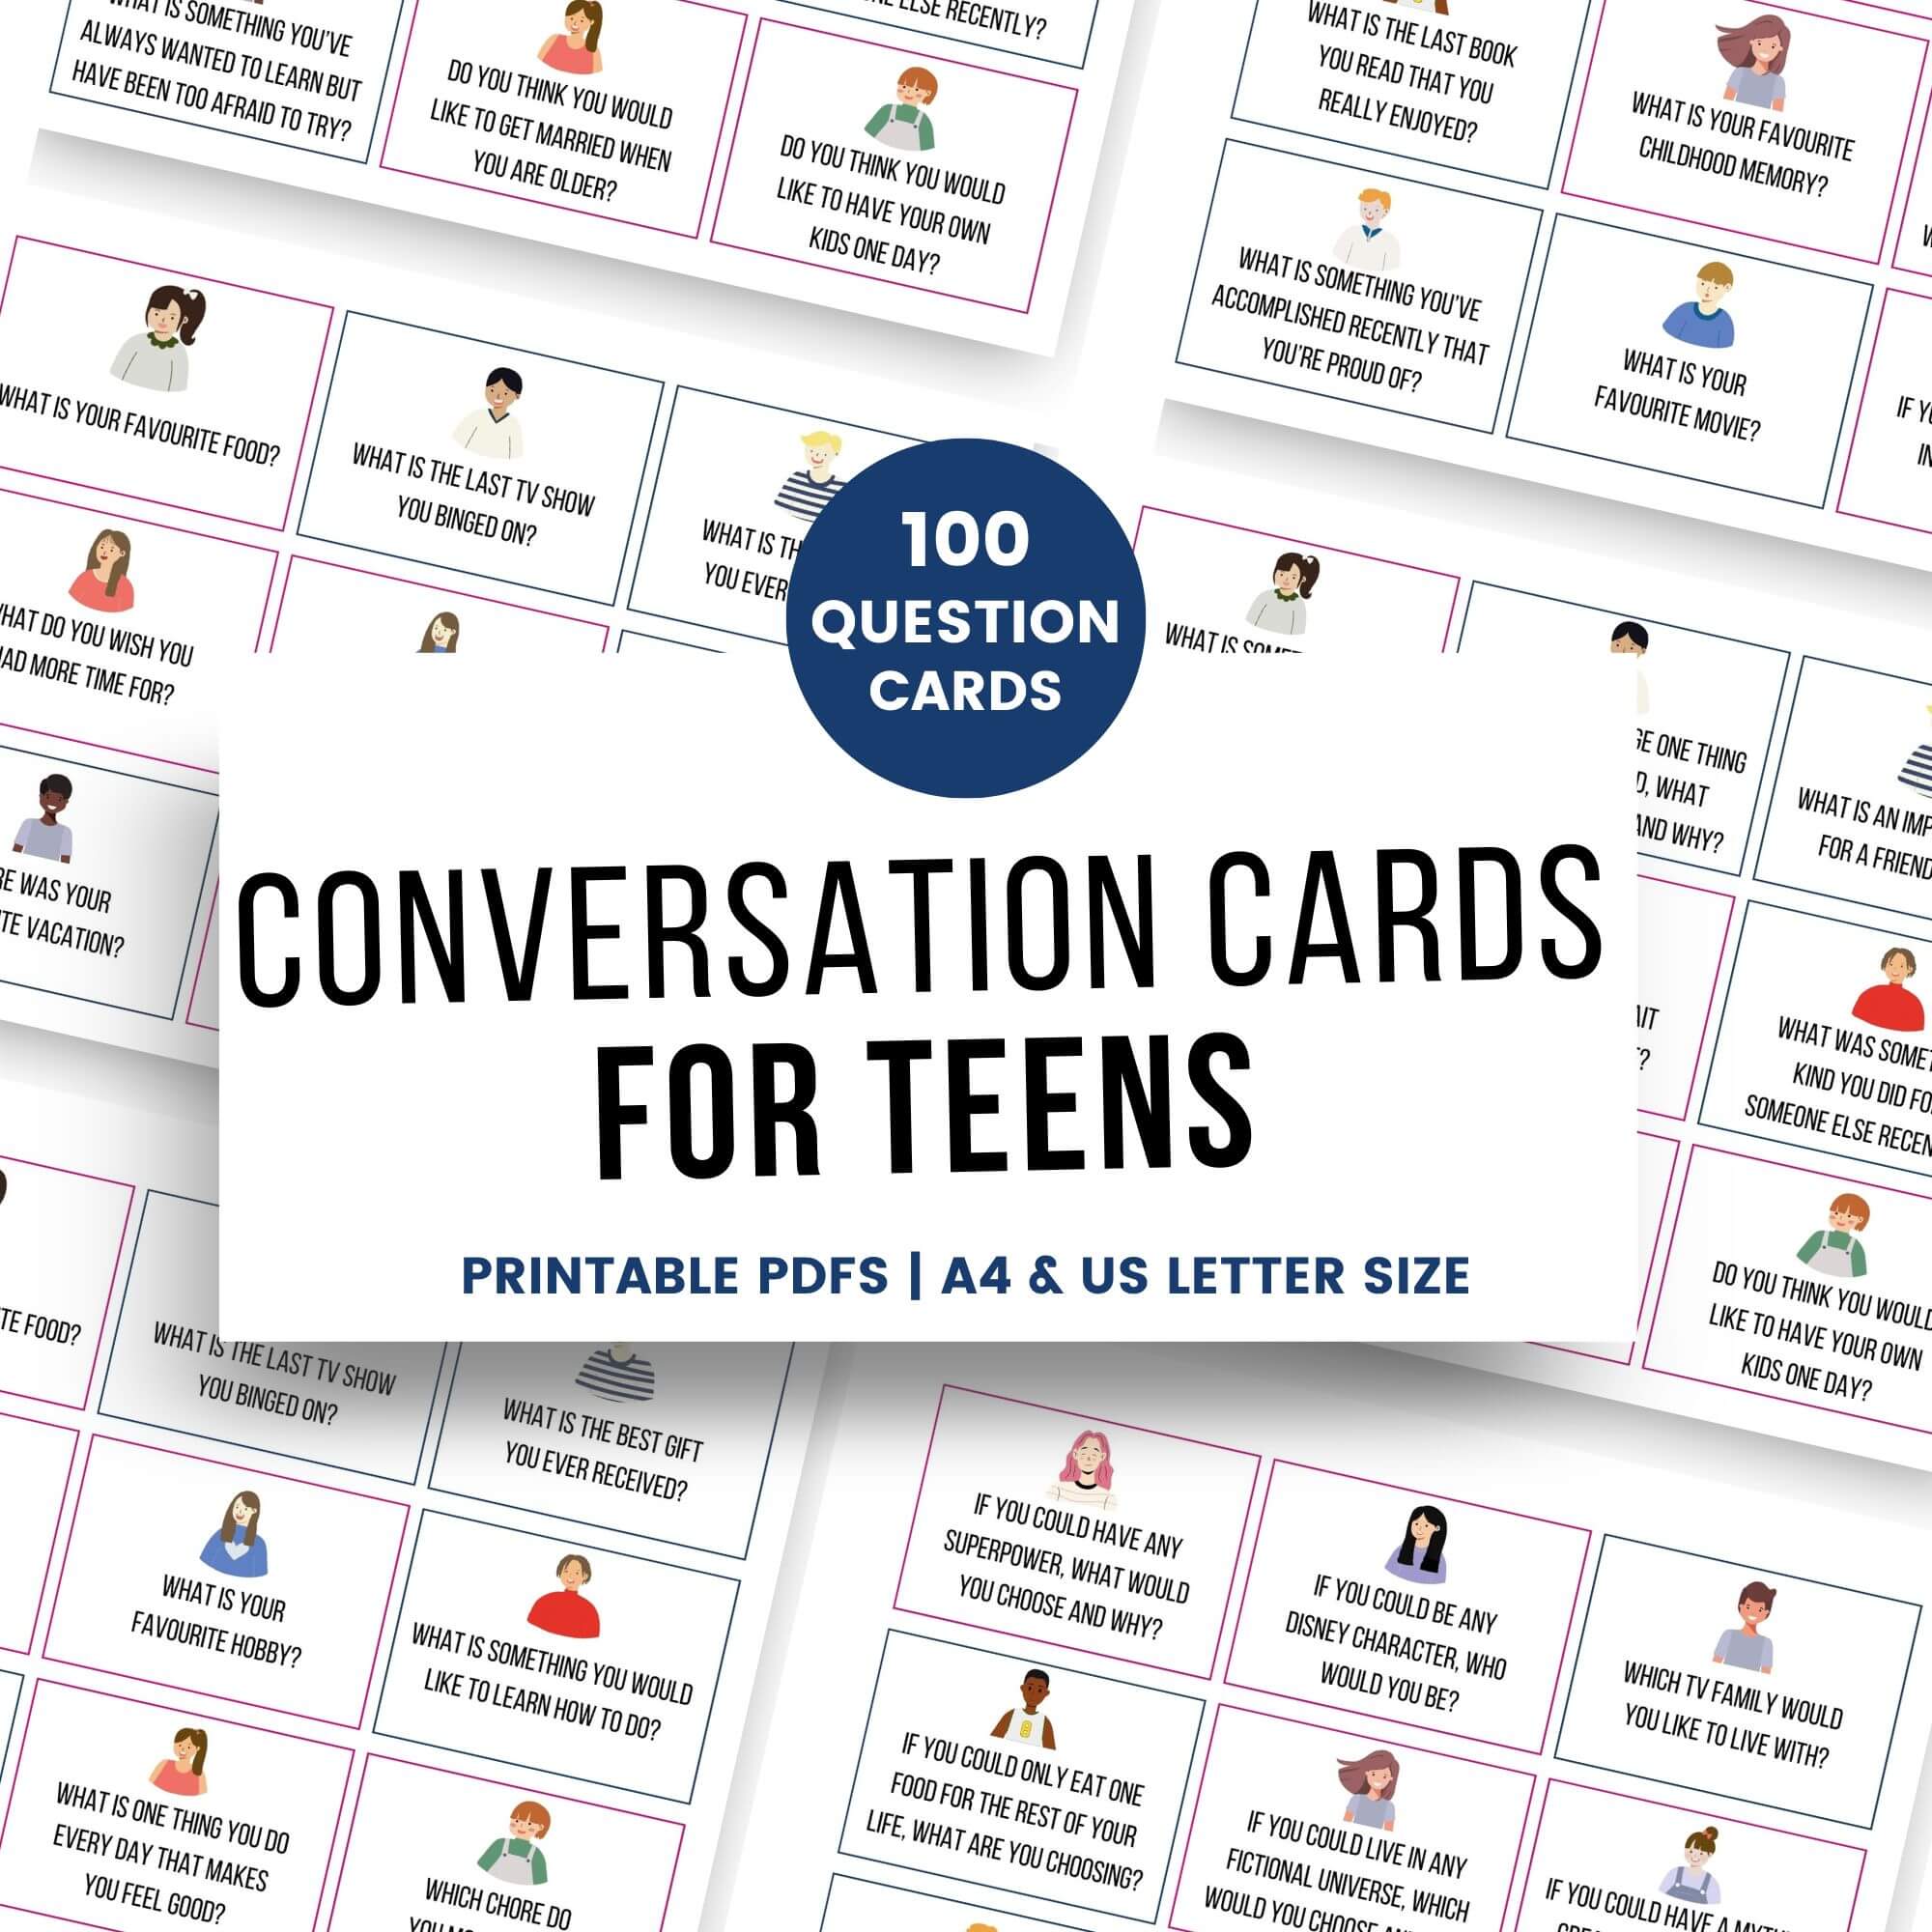 Conversation cards for teens shop banner